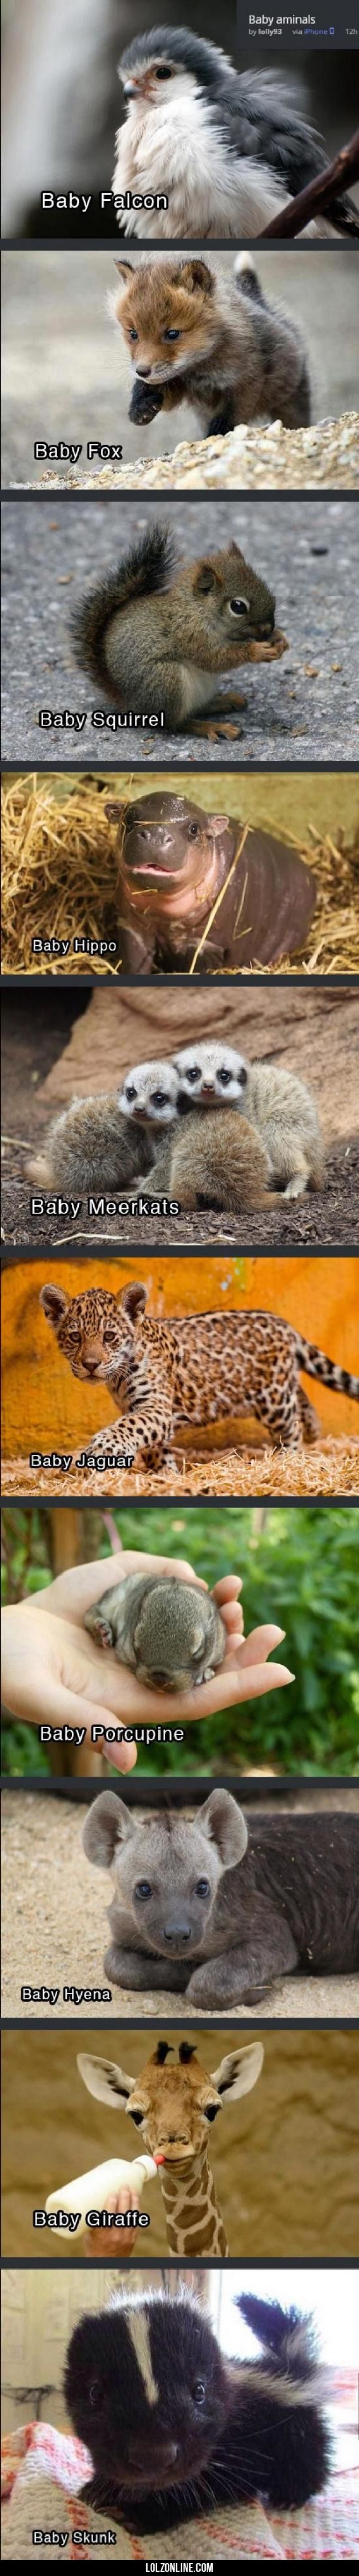 10 Baby Animals To Cheer You Up